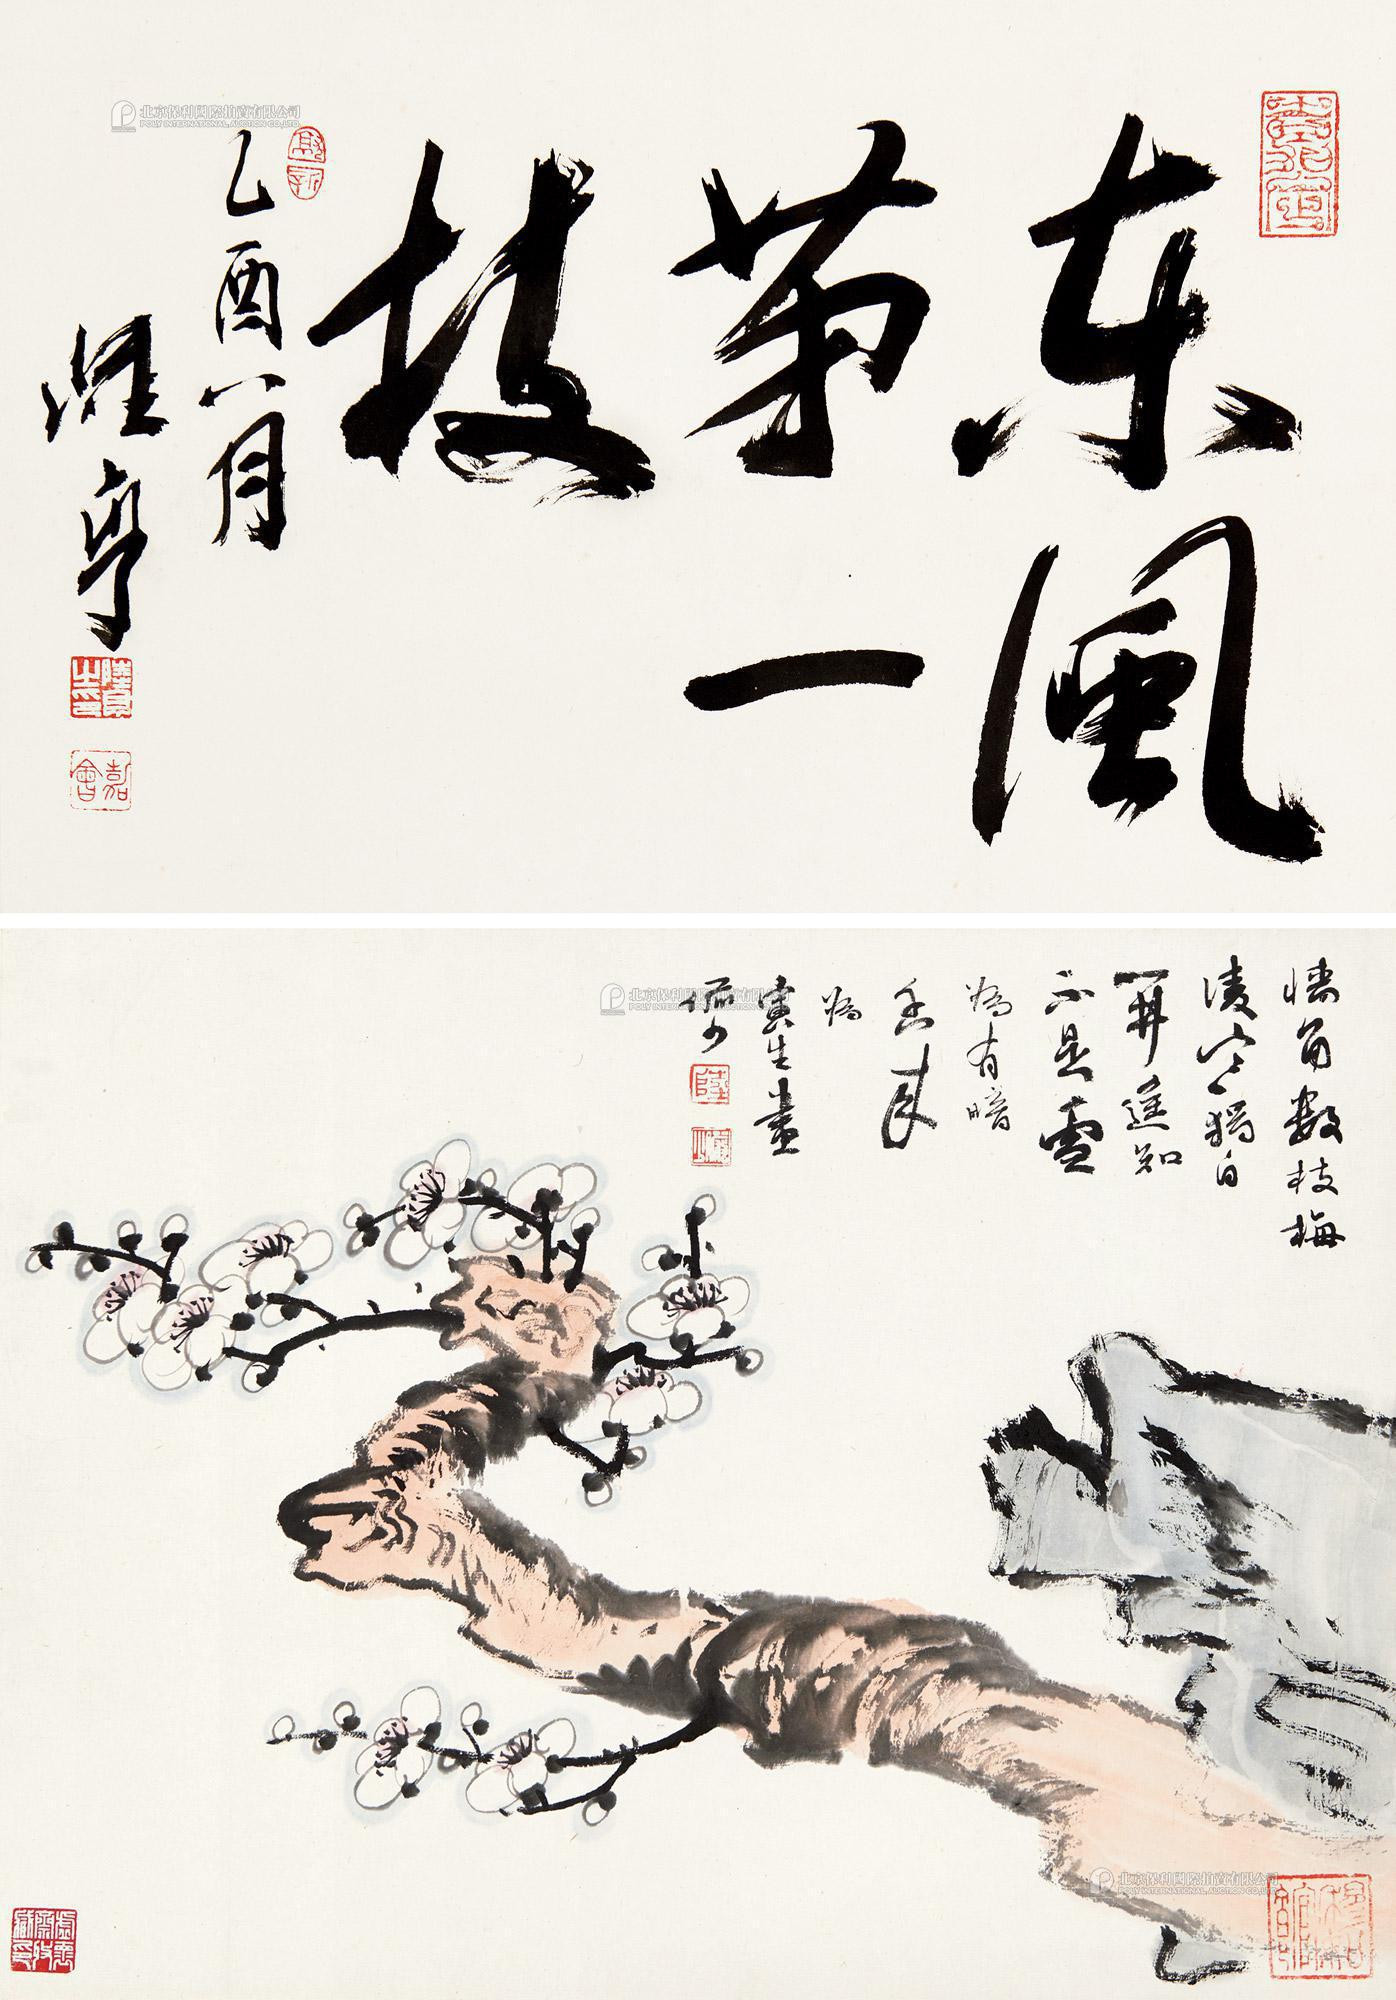 Calligraphy and Plum Bloom